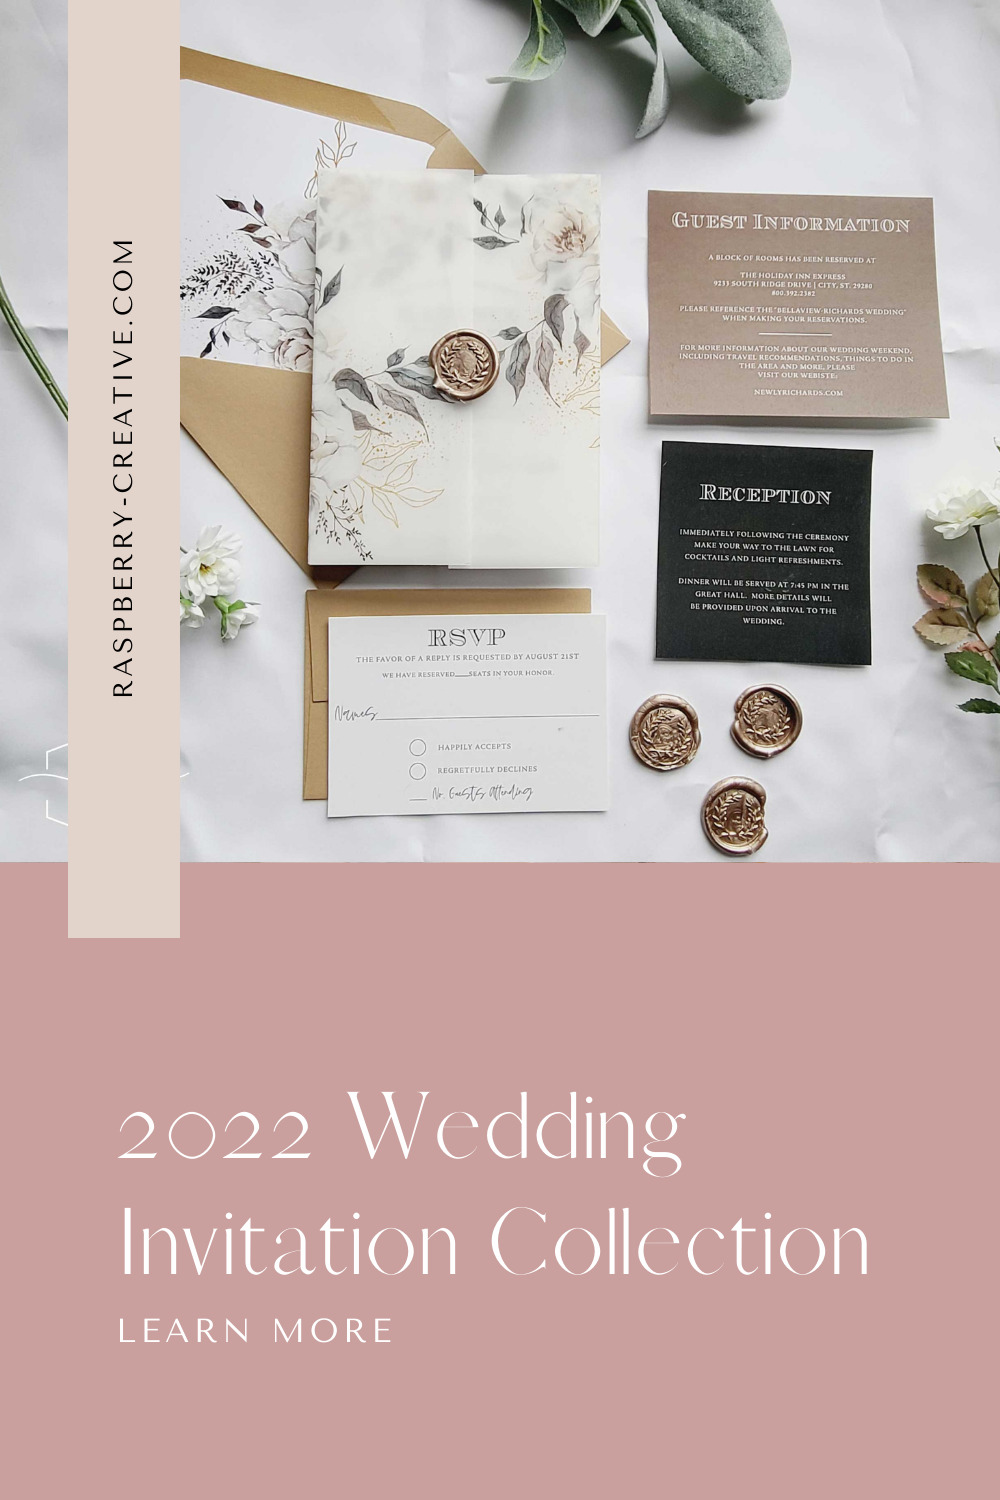 2022 Wedding Invitation Collection from Raspberry Creative